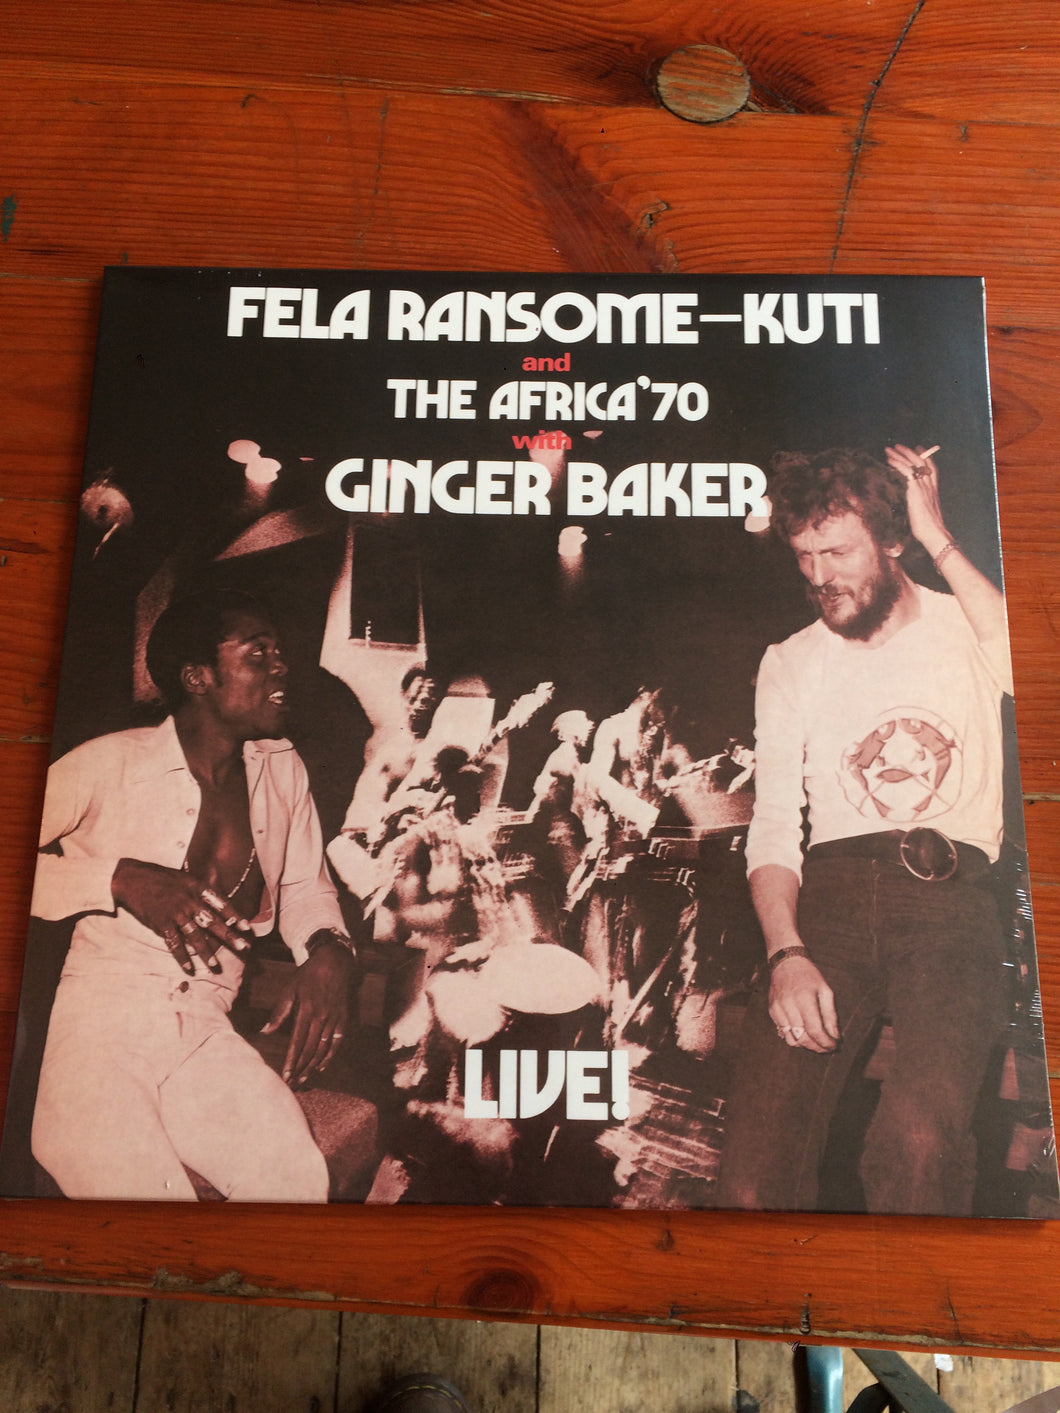 Fela Ransome - Kuti and The Africa '70 with Ginger Baker